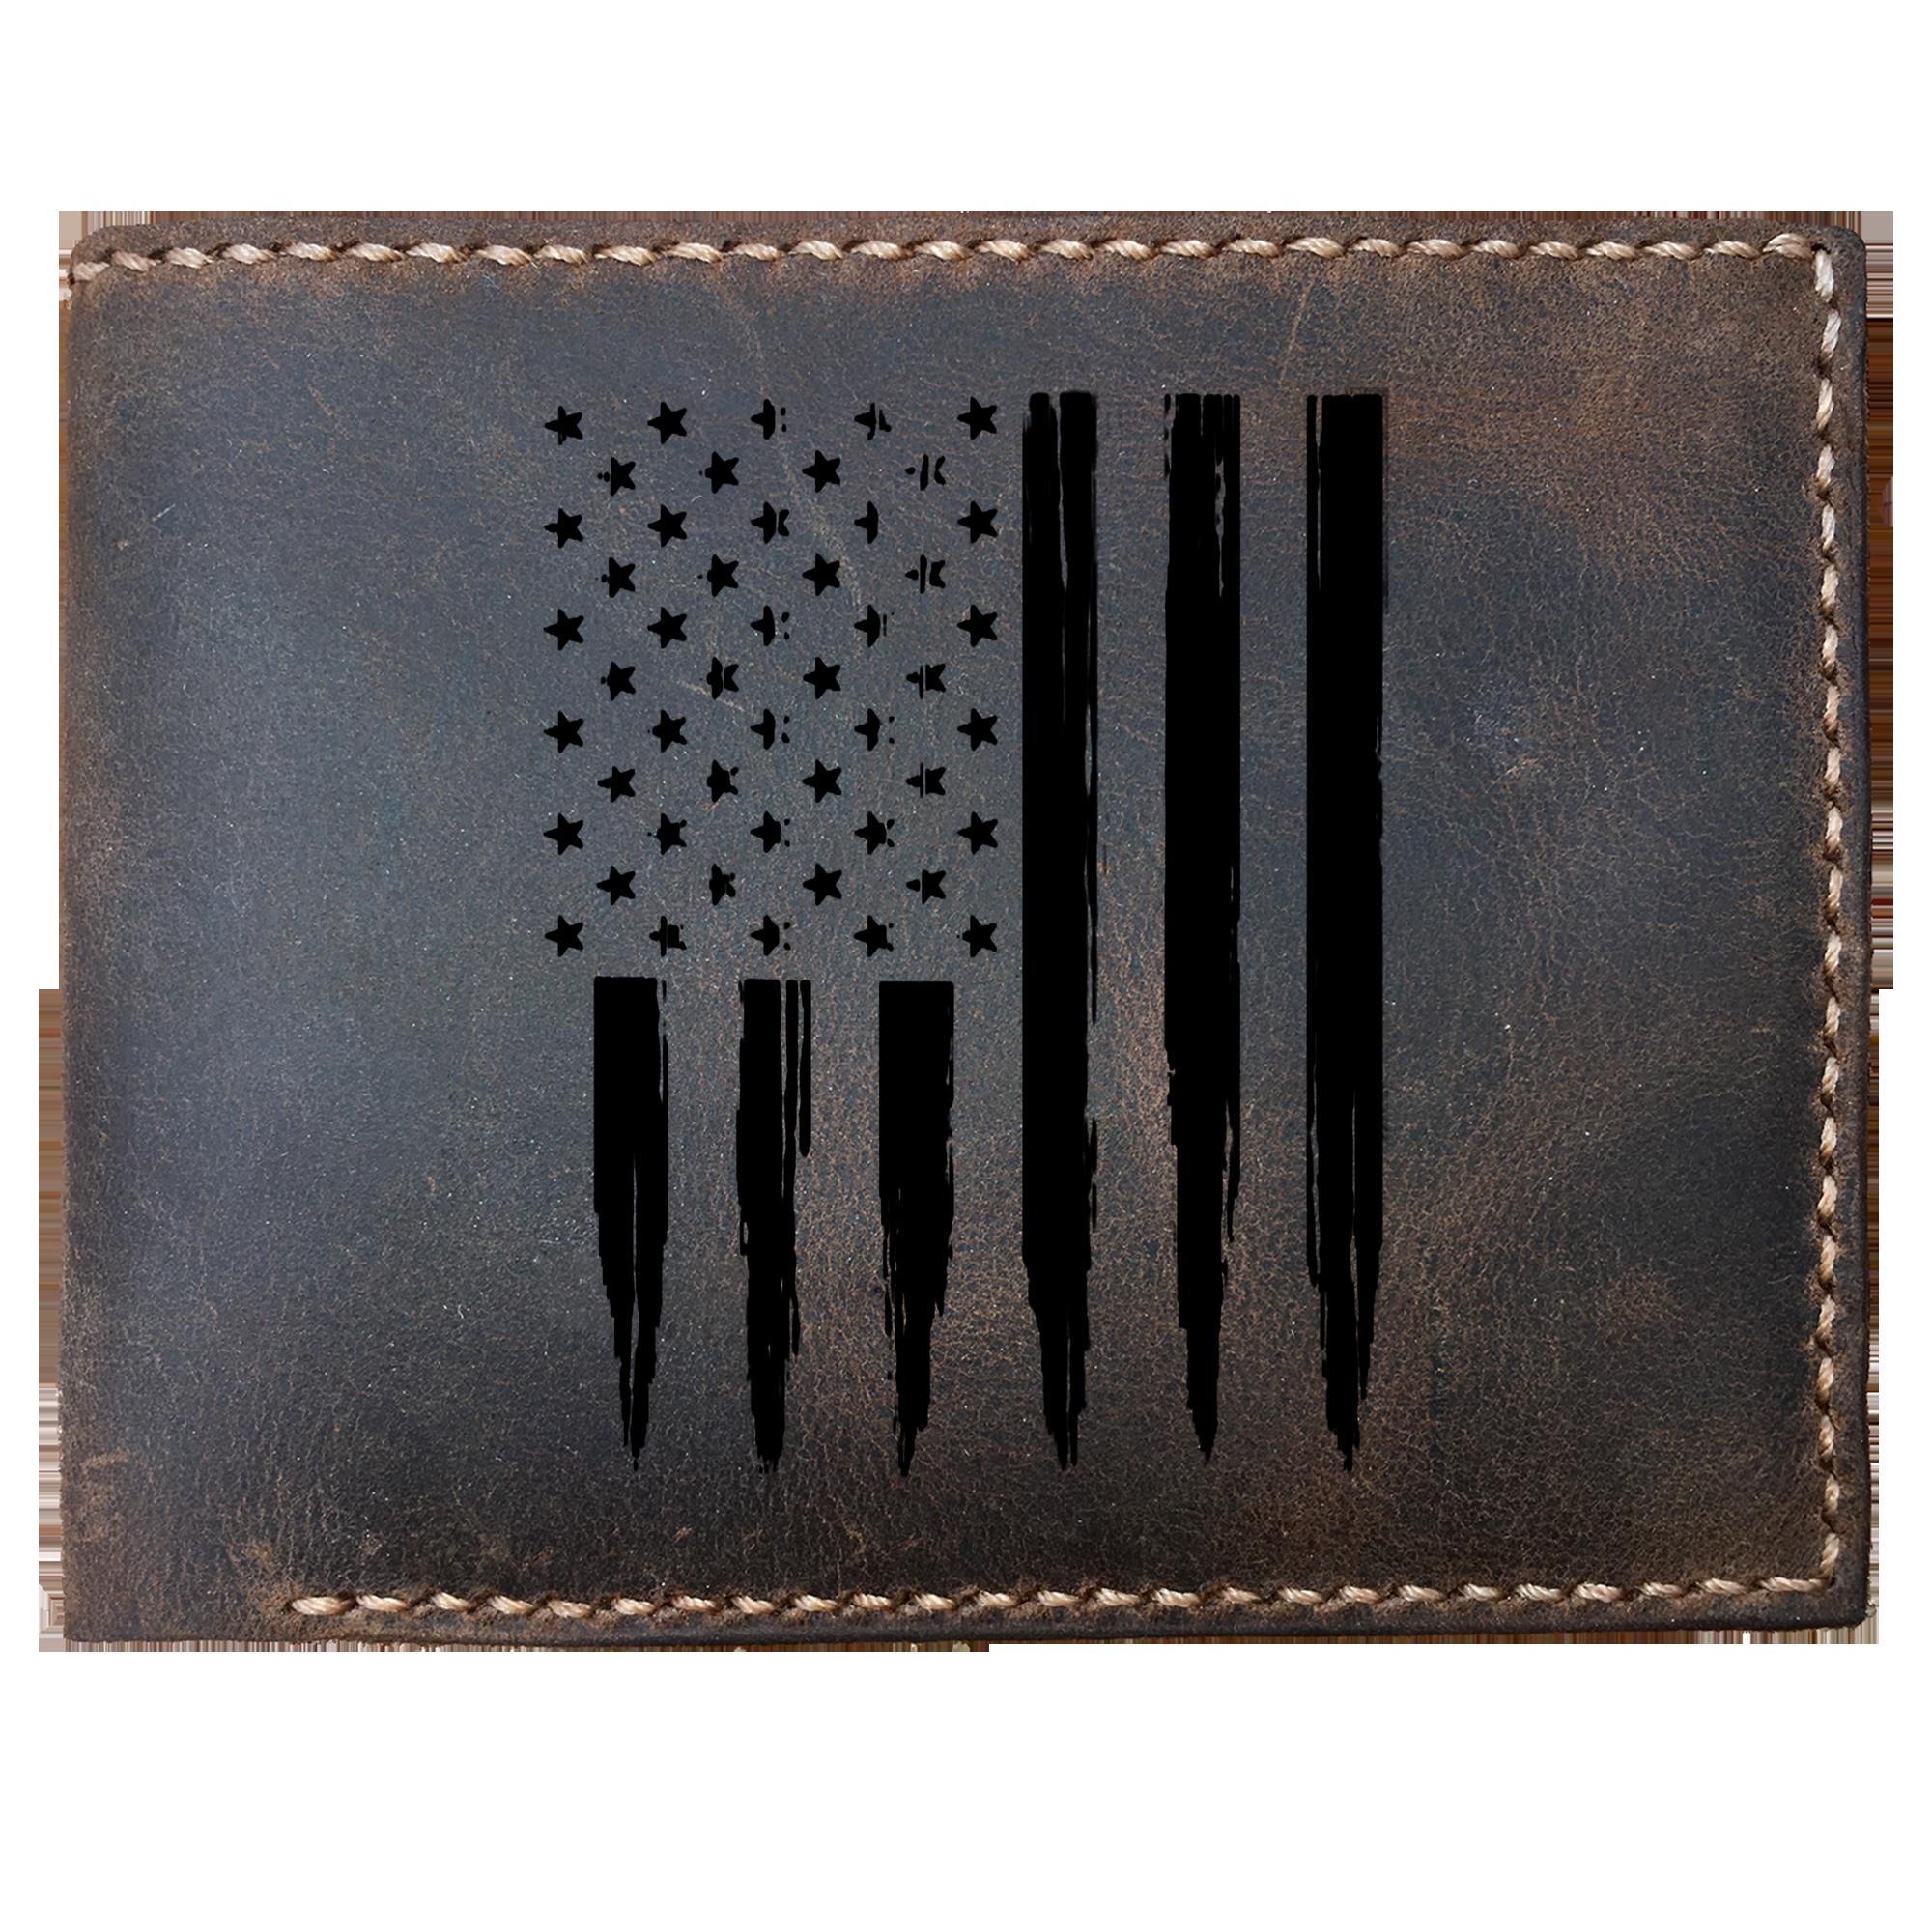 Skitongifts Funny Custom Laser Engraved Bifold Leather Wallet For Men, Police Thin Blue Line Flag Vertical